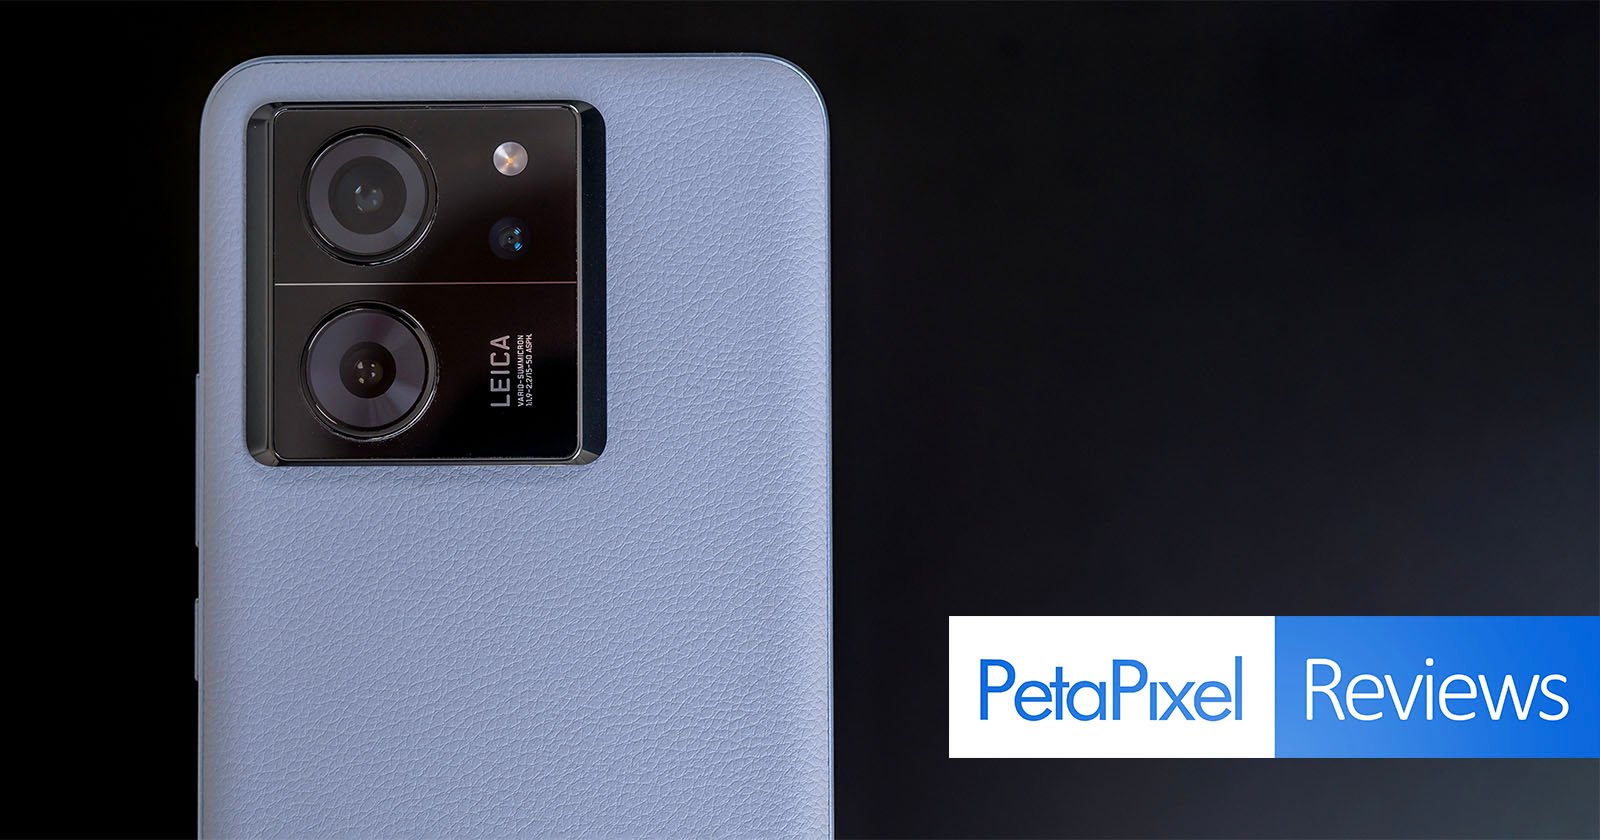 Xiaomi 13T Pro Camera Review: How Good is the Leica Camera?